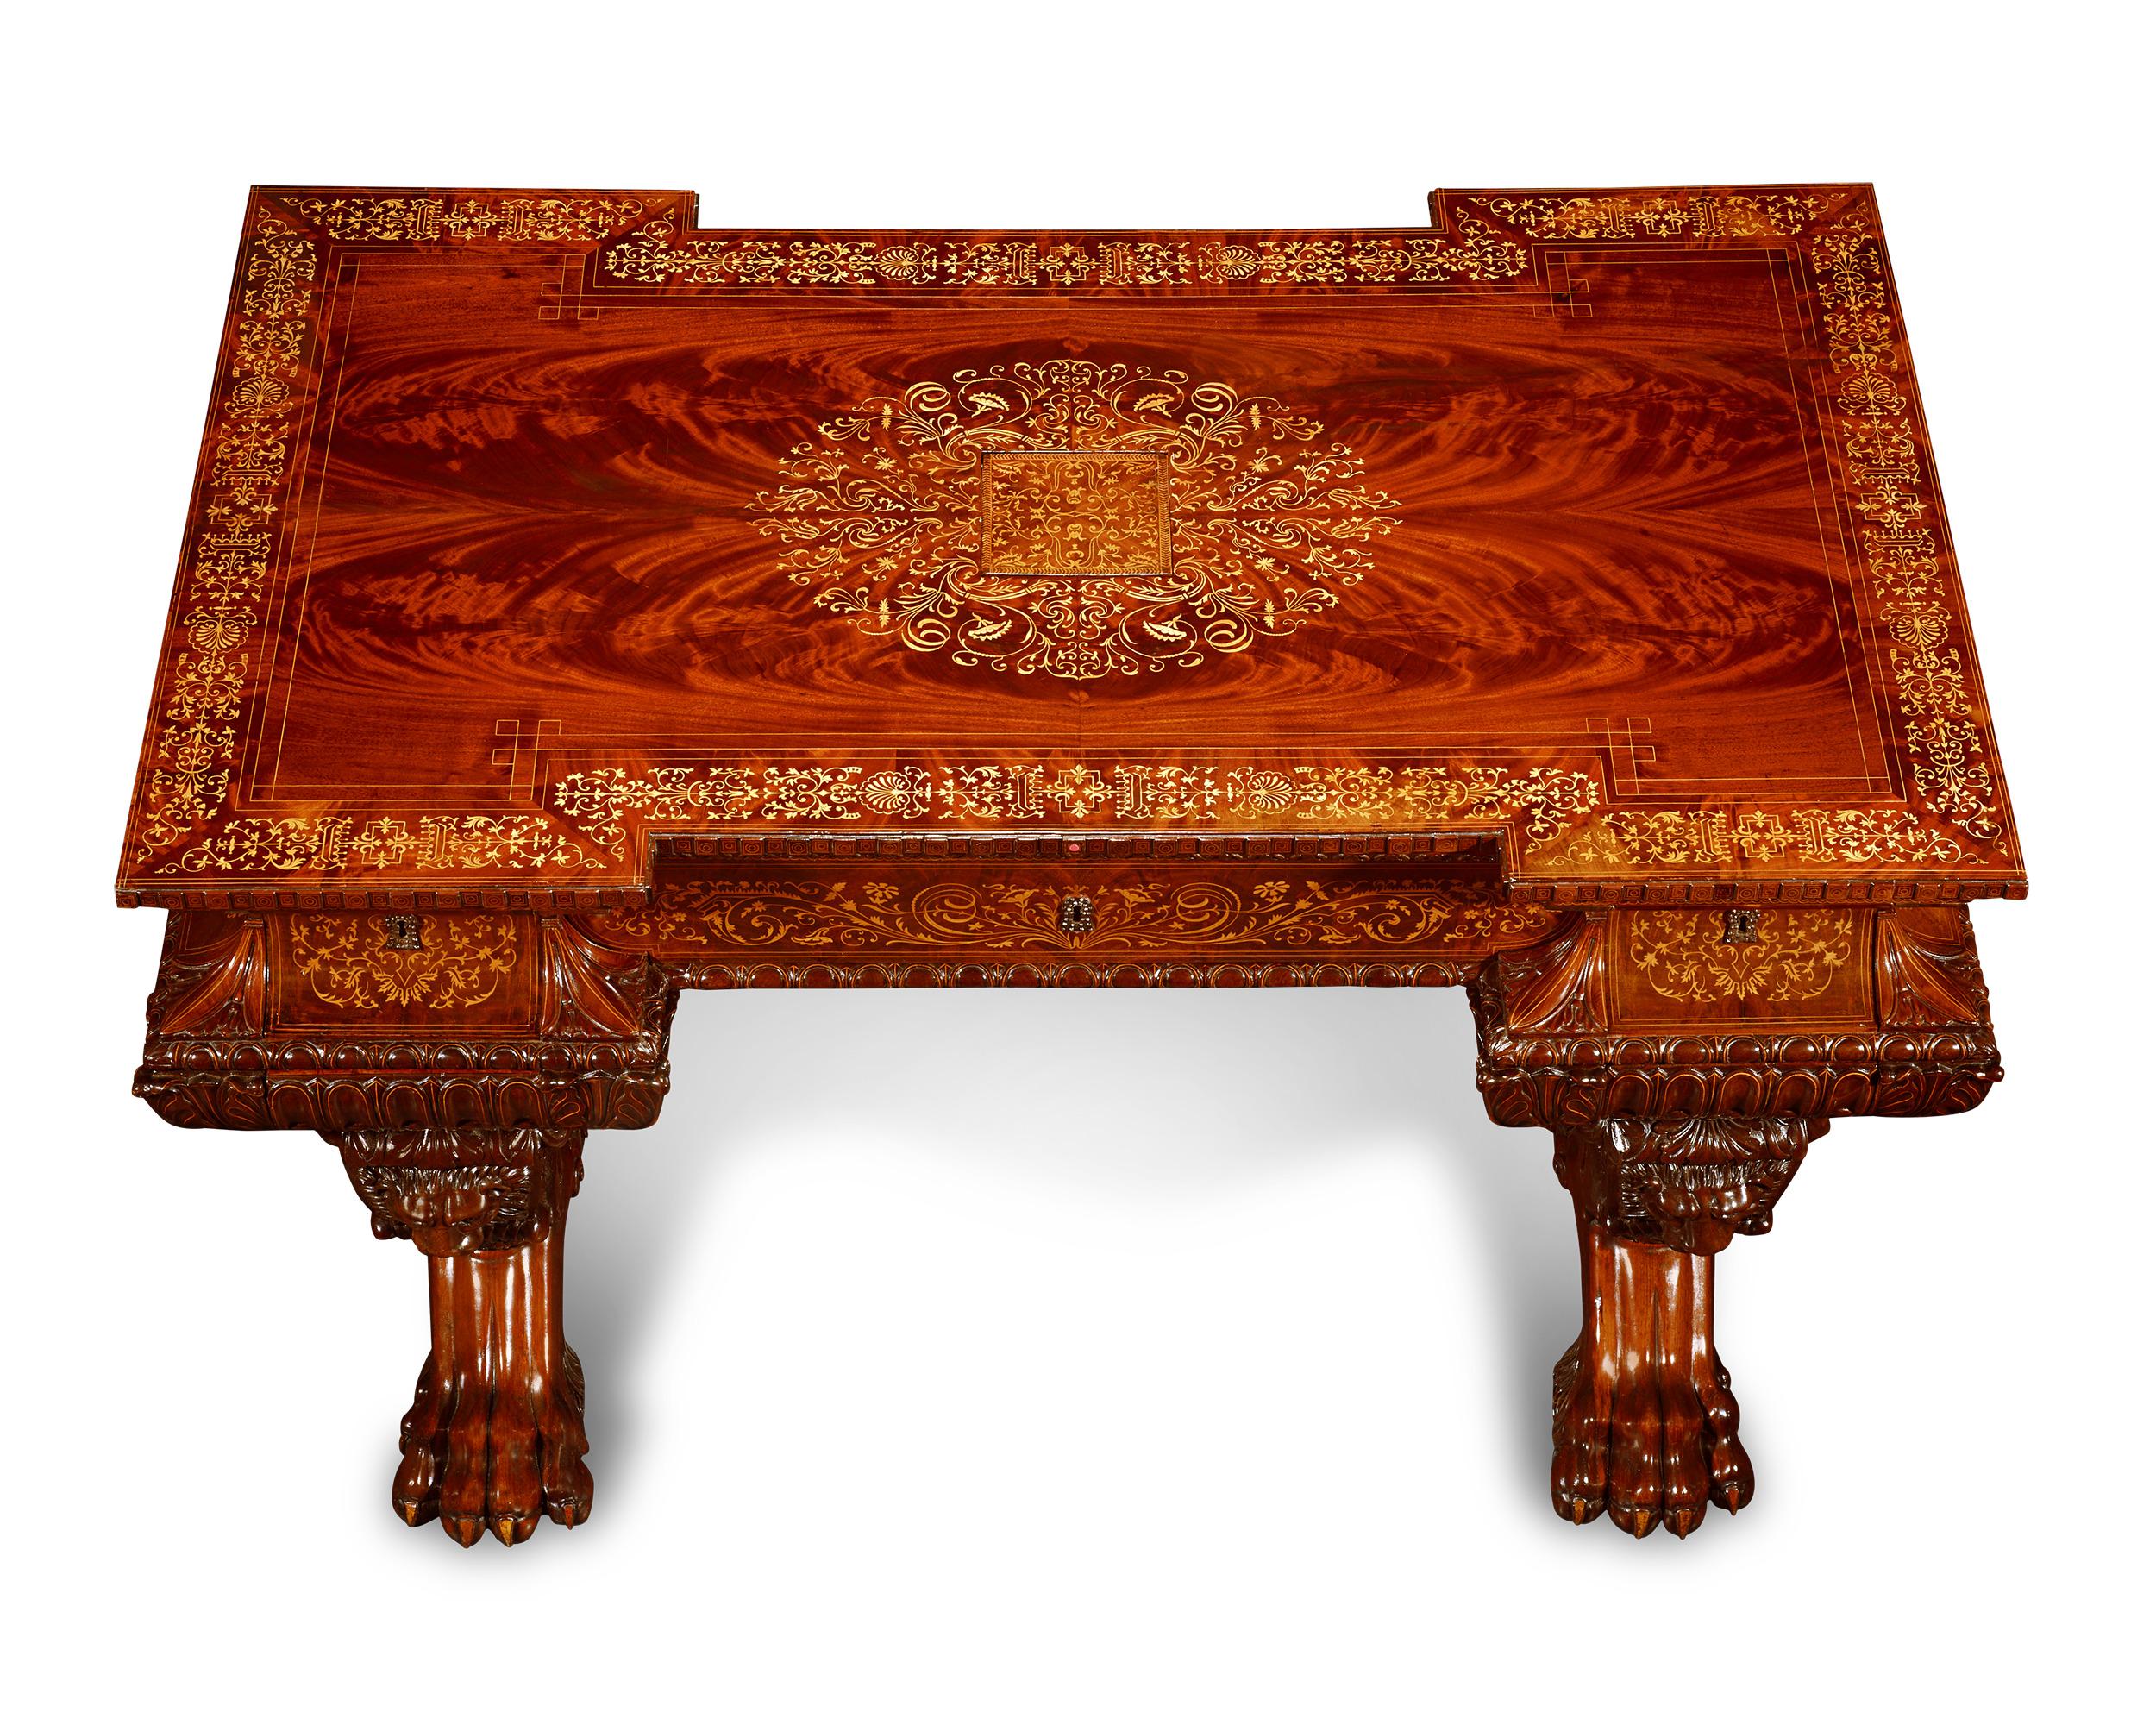 This Italian carved mahogany writing table is said to have been crafted specifically for use by King Carlo Alberto (Charles Albert of Sardinia, 1798-1849). Both beautiful and functional, the desk and armchair feature complex woodwork with elaborate